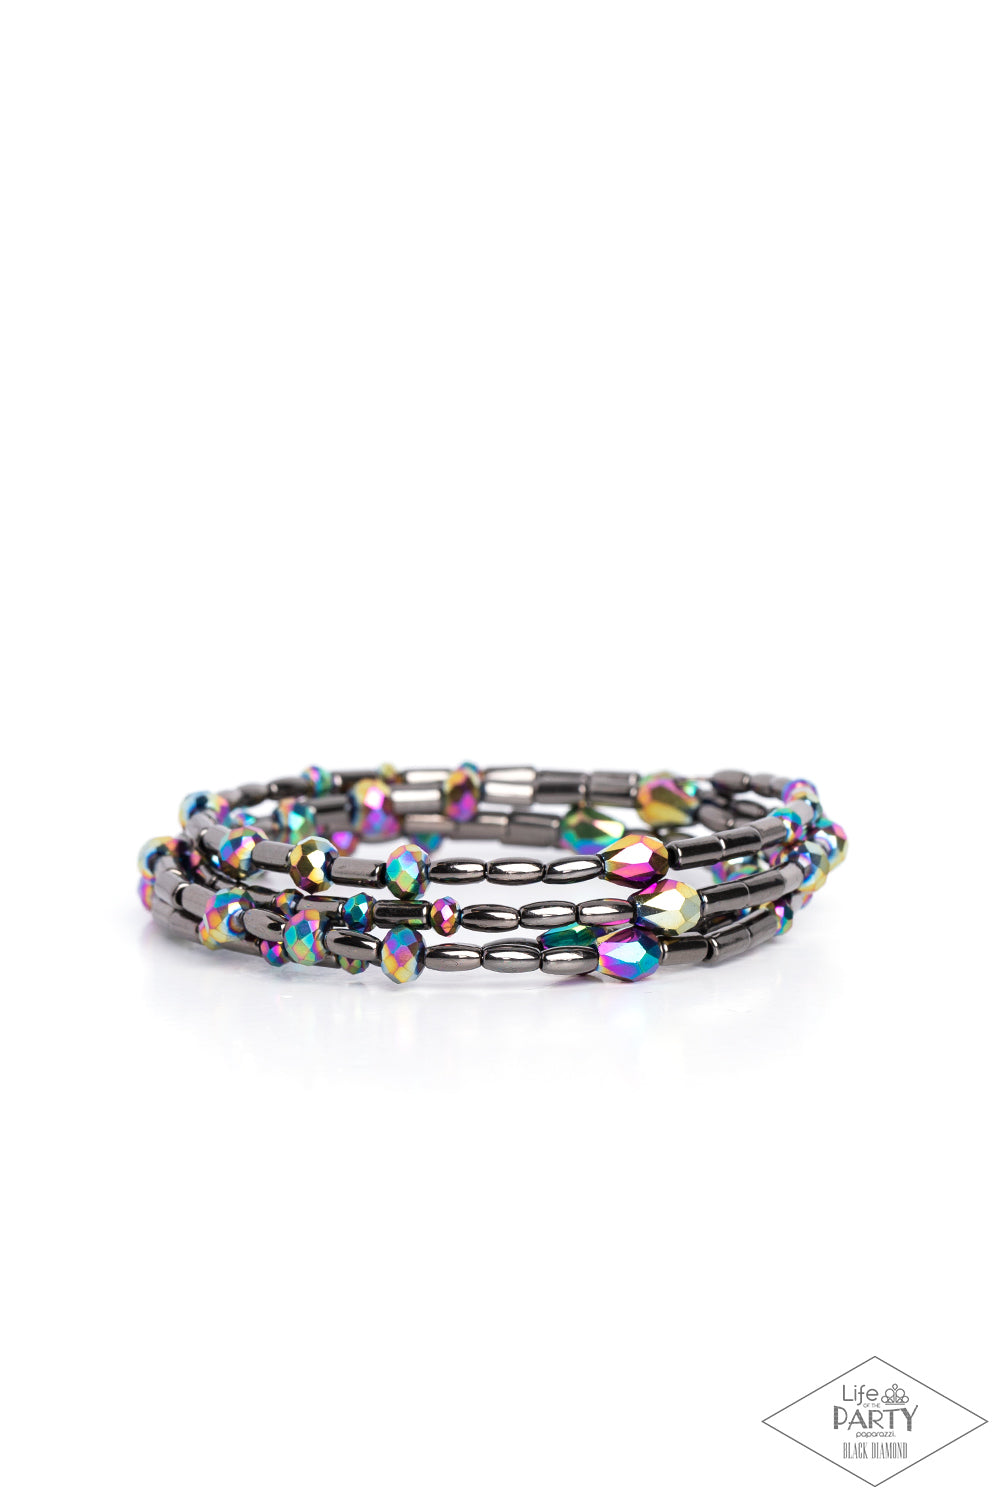 Regal Remix - Oil Spill Multi Bracelet - Paparazzi Accessories - Varying in size and shape, oil spill gem beads and glistening gunmetal beads are threaded along a coiled wire, creating a regal infinity wrap style bracelet around the wrist. Due to its prismatic palette, color may vary. Sold as one individual bracelet.